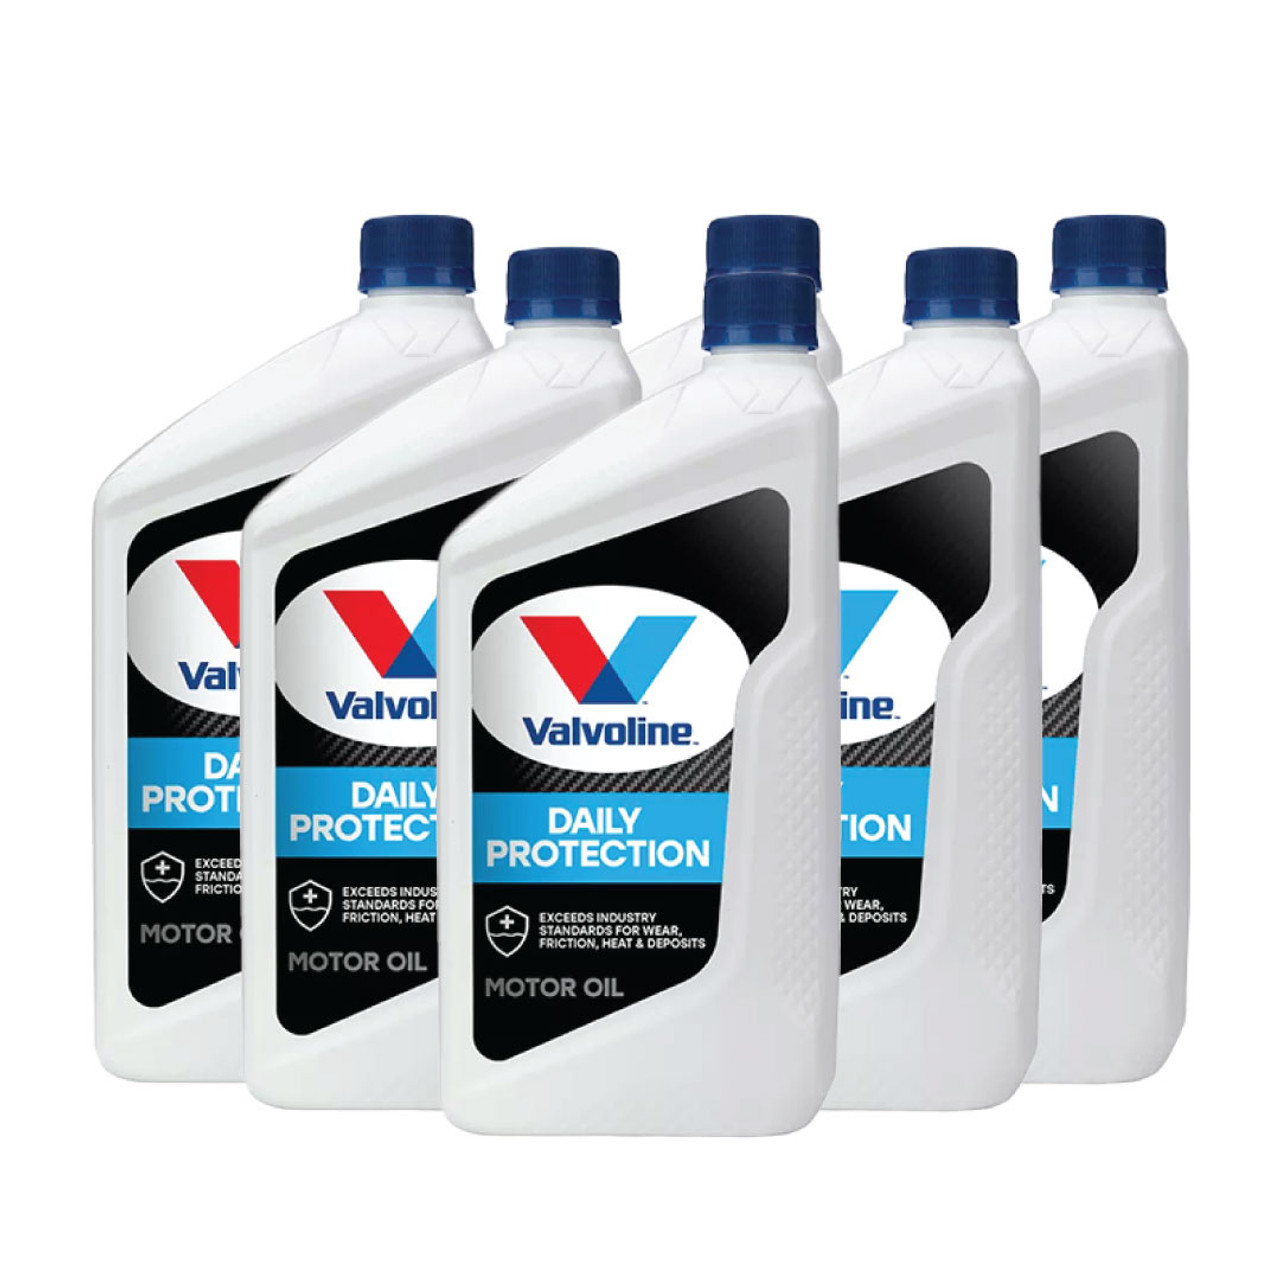 All the WEATHER SHIELD products by Snatch,VALVOLINE,PROTECTIVE